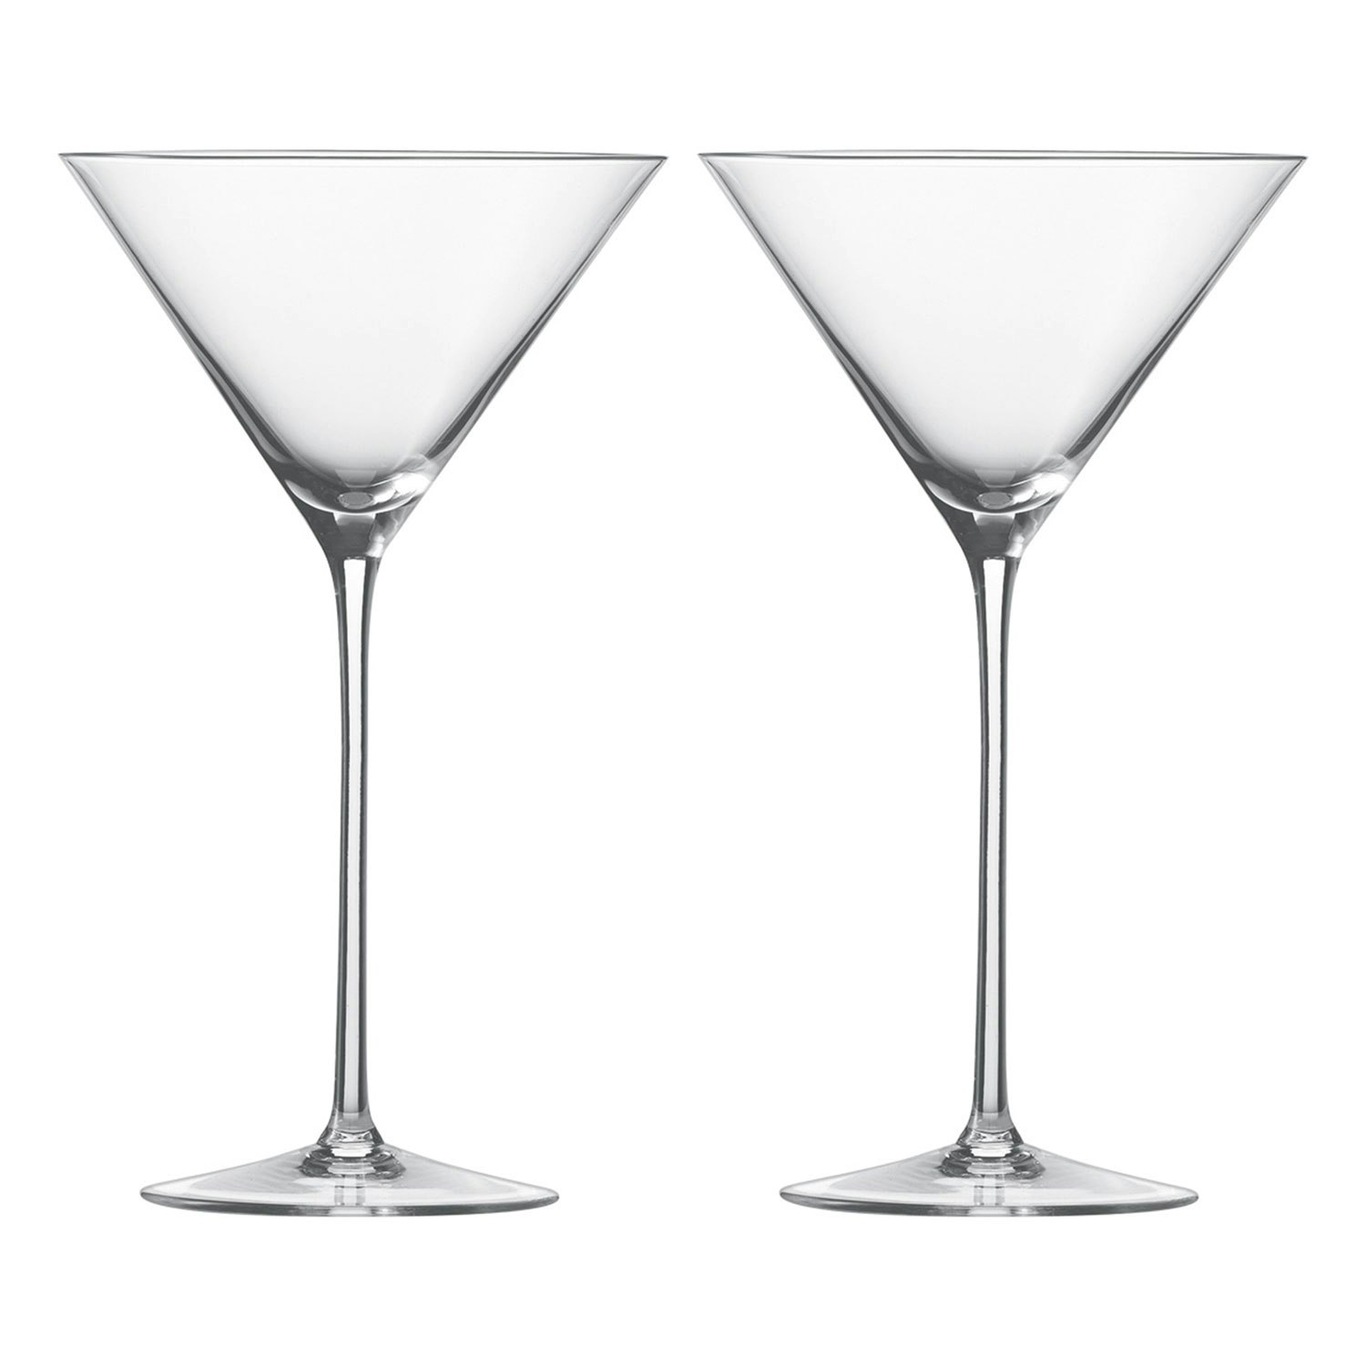 https://royaldesign.com/image/2/zwiesel-enoteca-martini-glass-29-cl-2-pack-0?w=800&quality=80